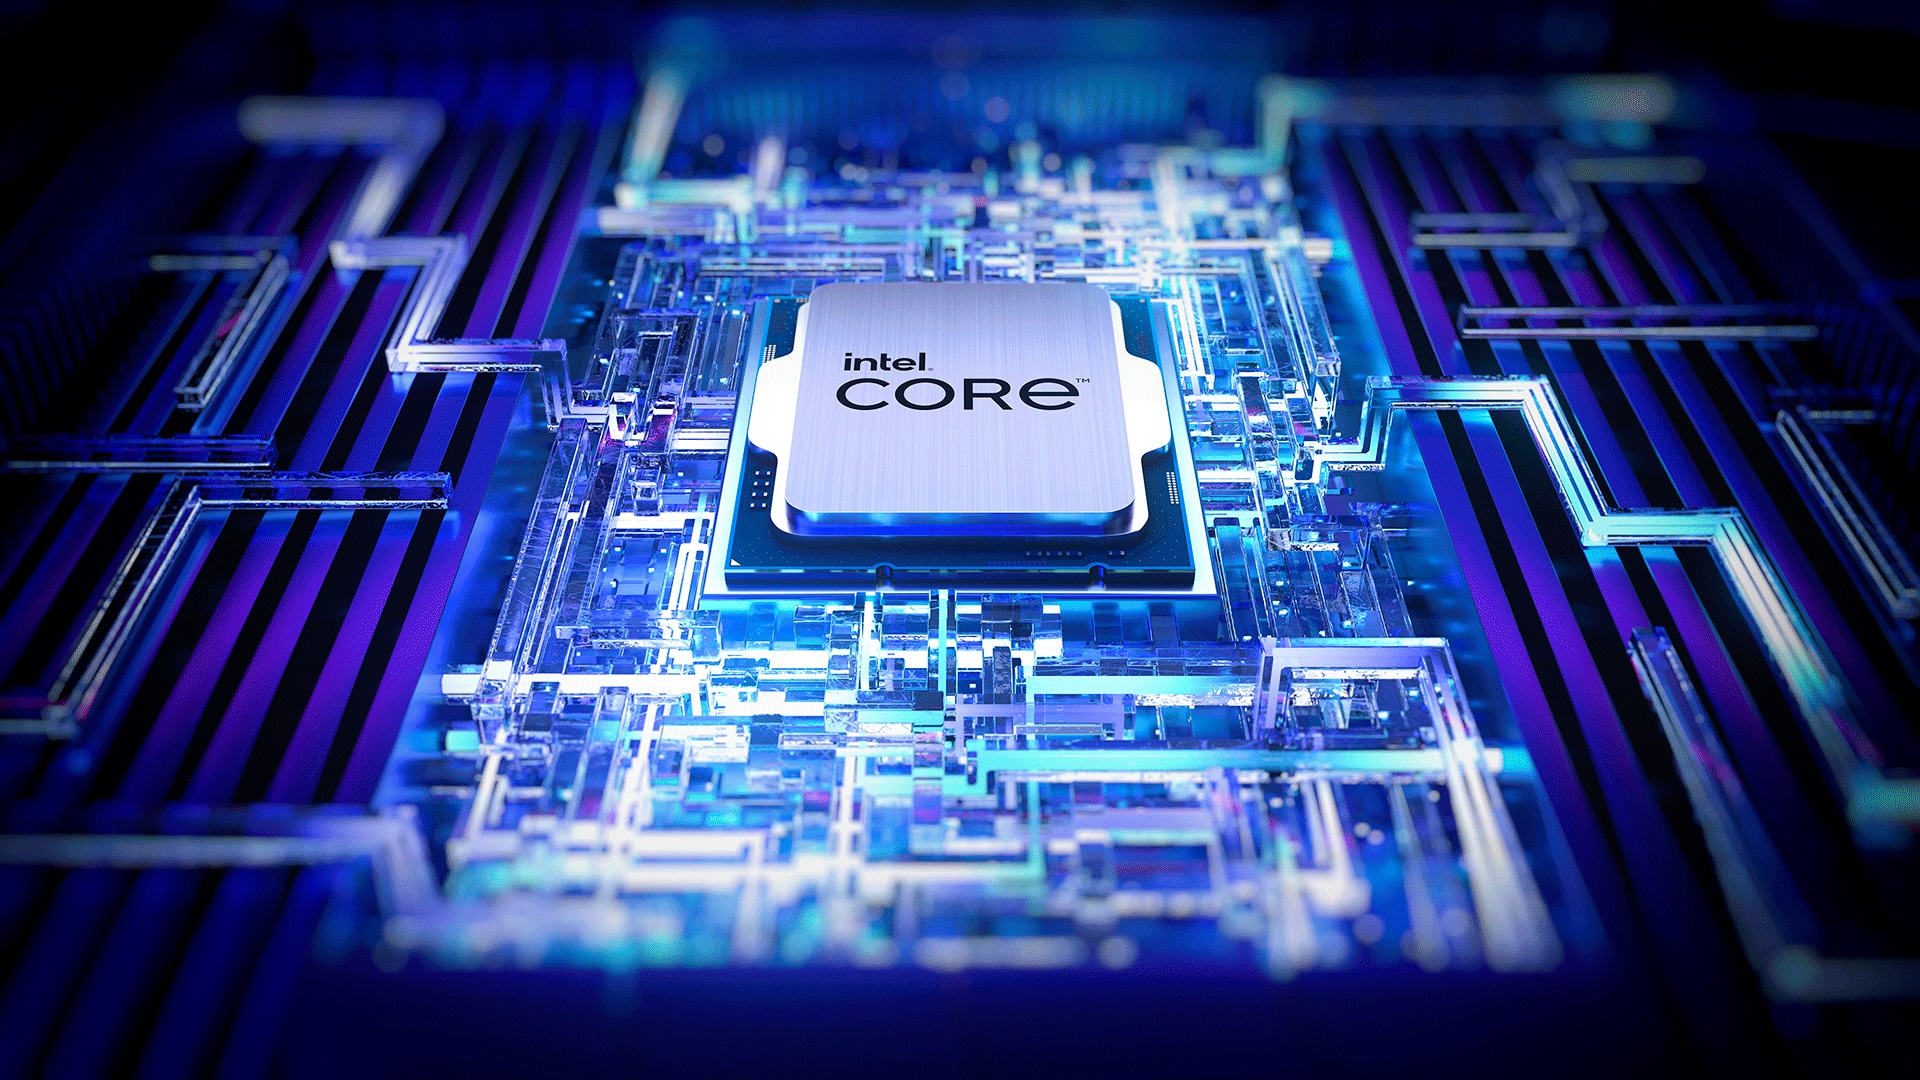 More-core Intel Core i7-13700 makes underwhelming first appearance